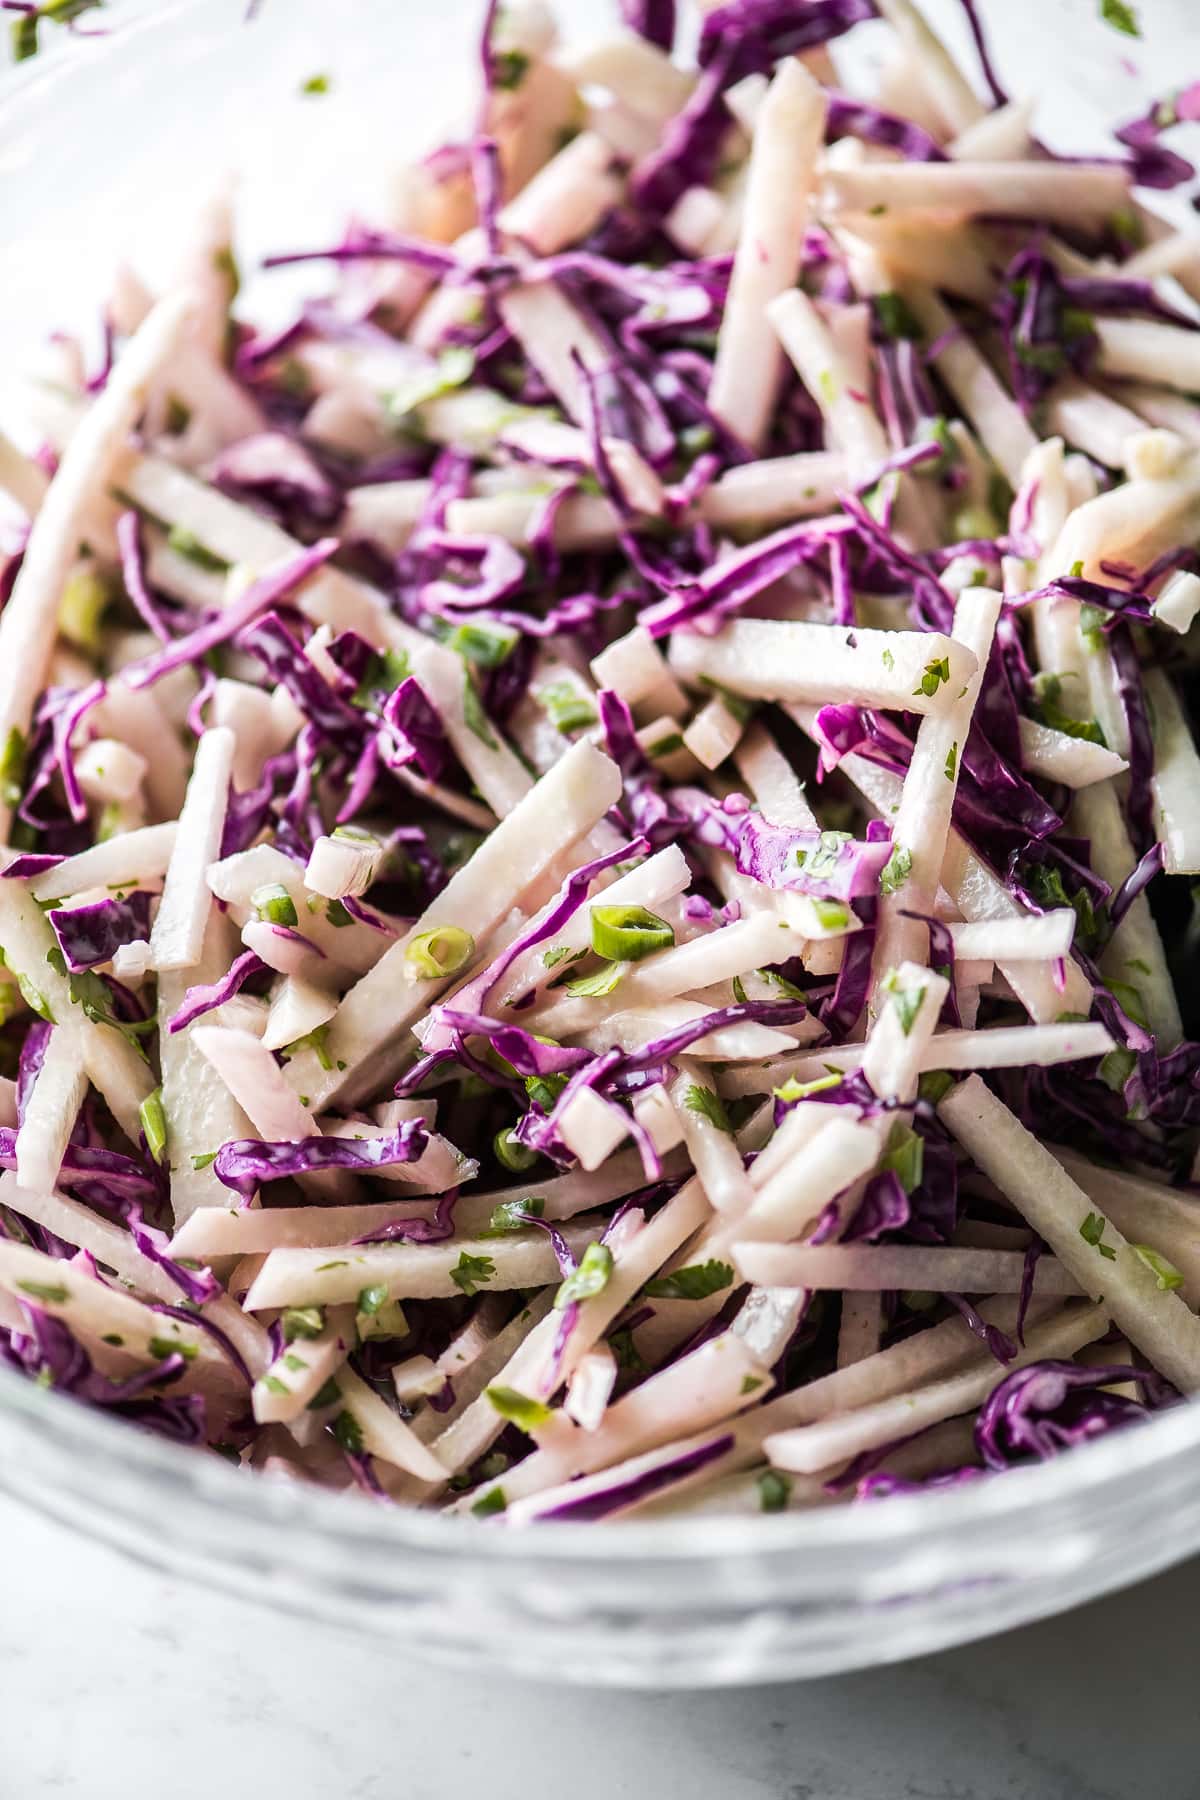 Jicama slaw with cabbage, cilantro and lime juice.